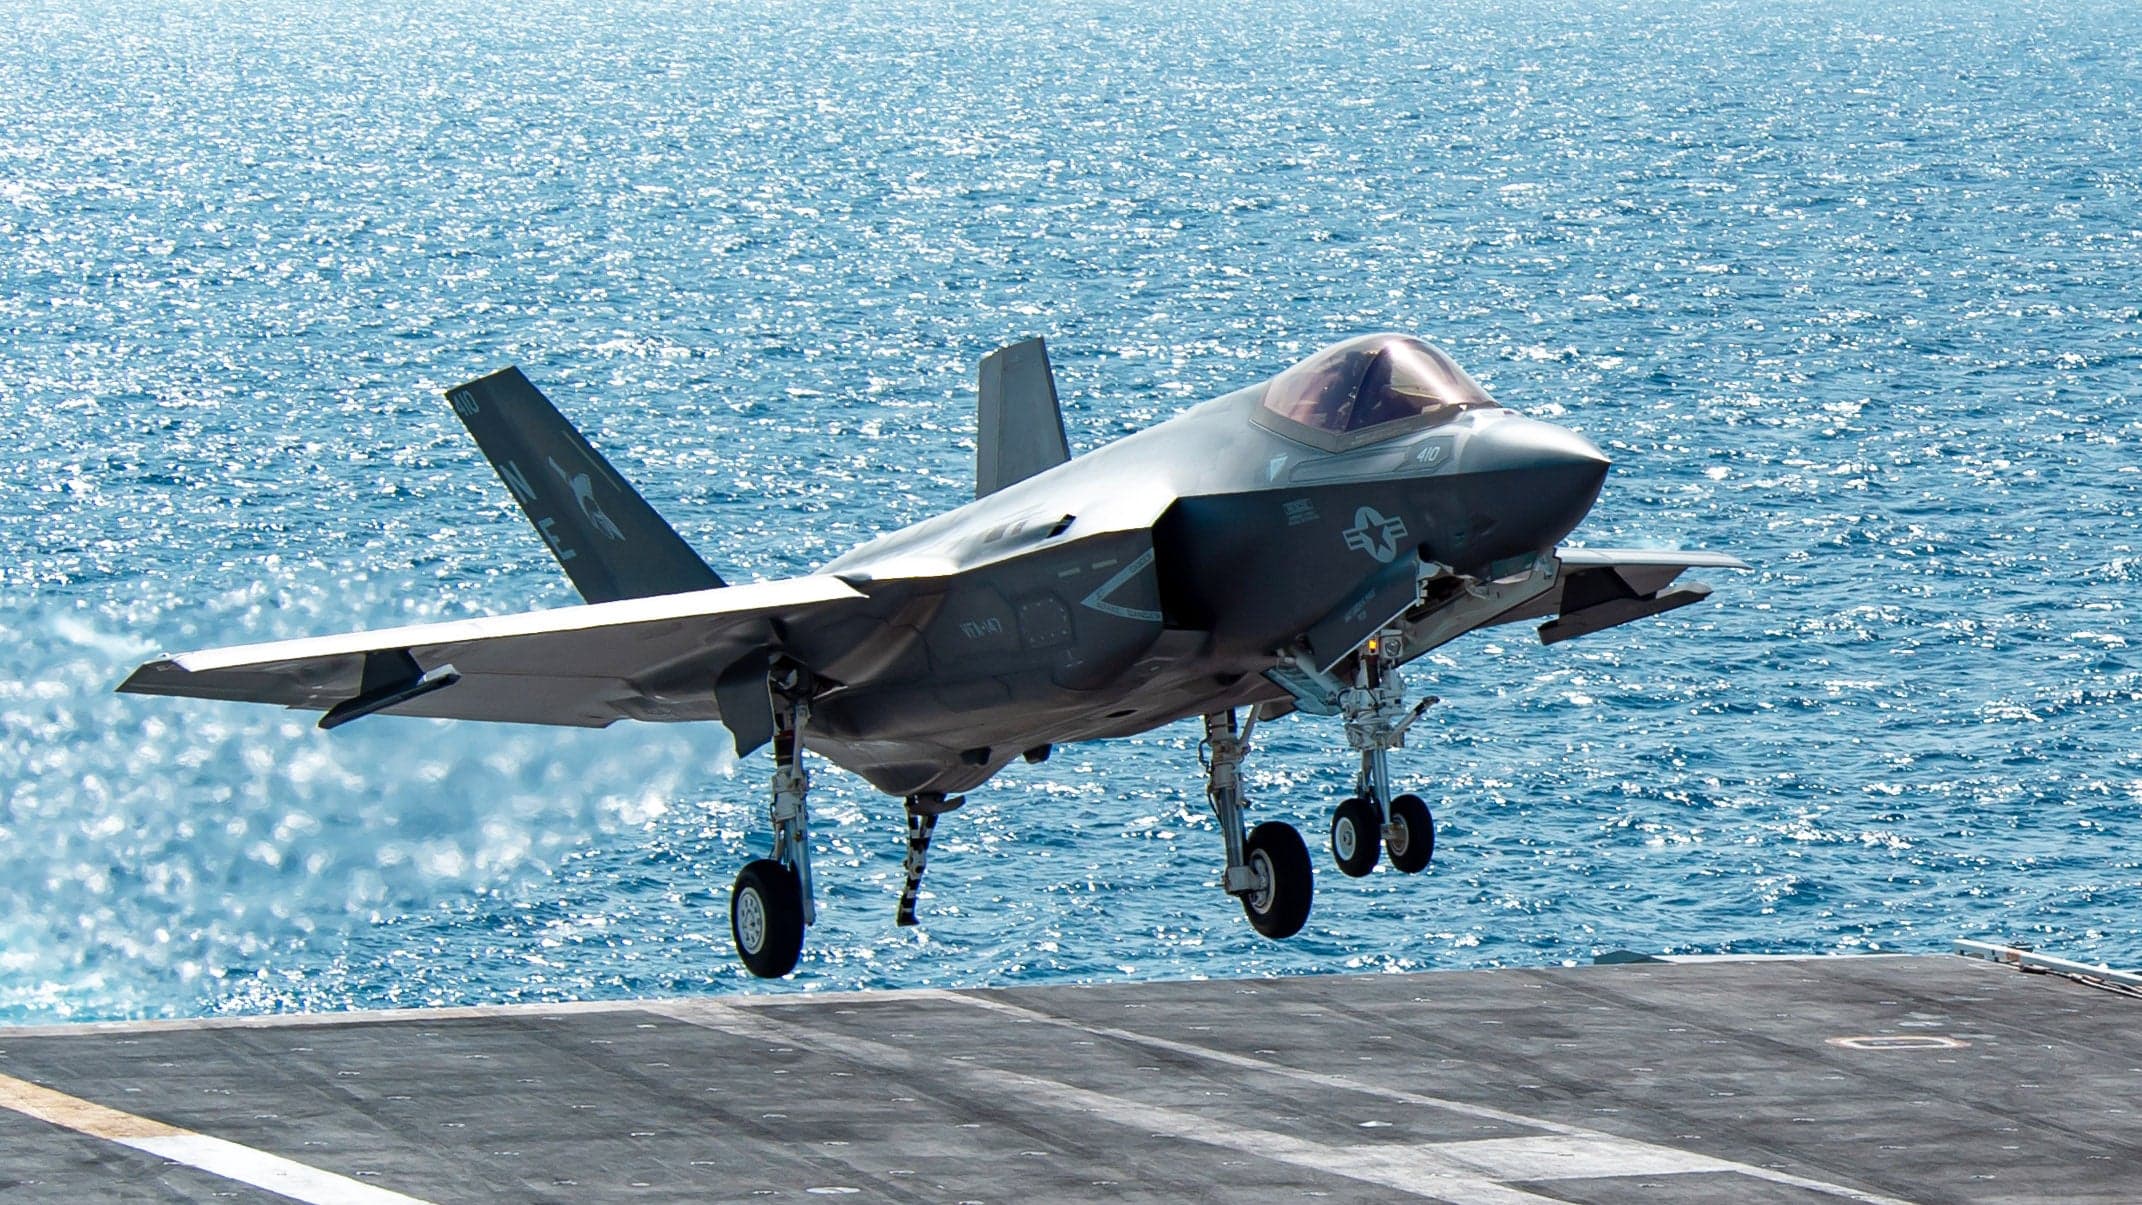 Video Shows The Last Moments Of The Navy’s F-35C Before It Crashed Into The Sea (Updated)